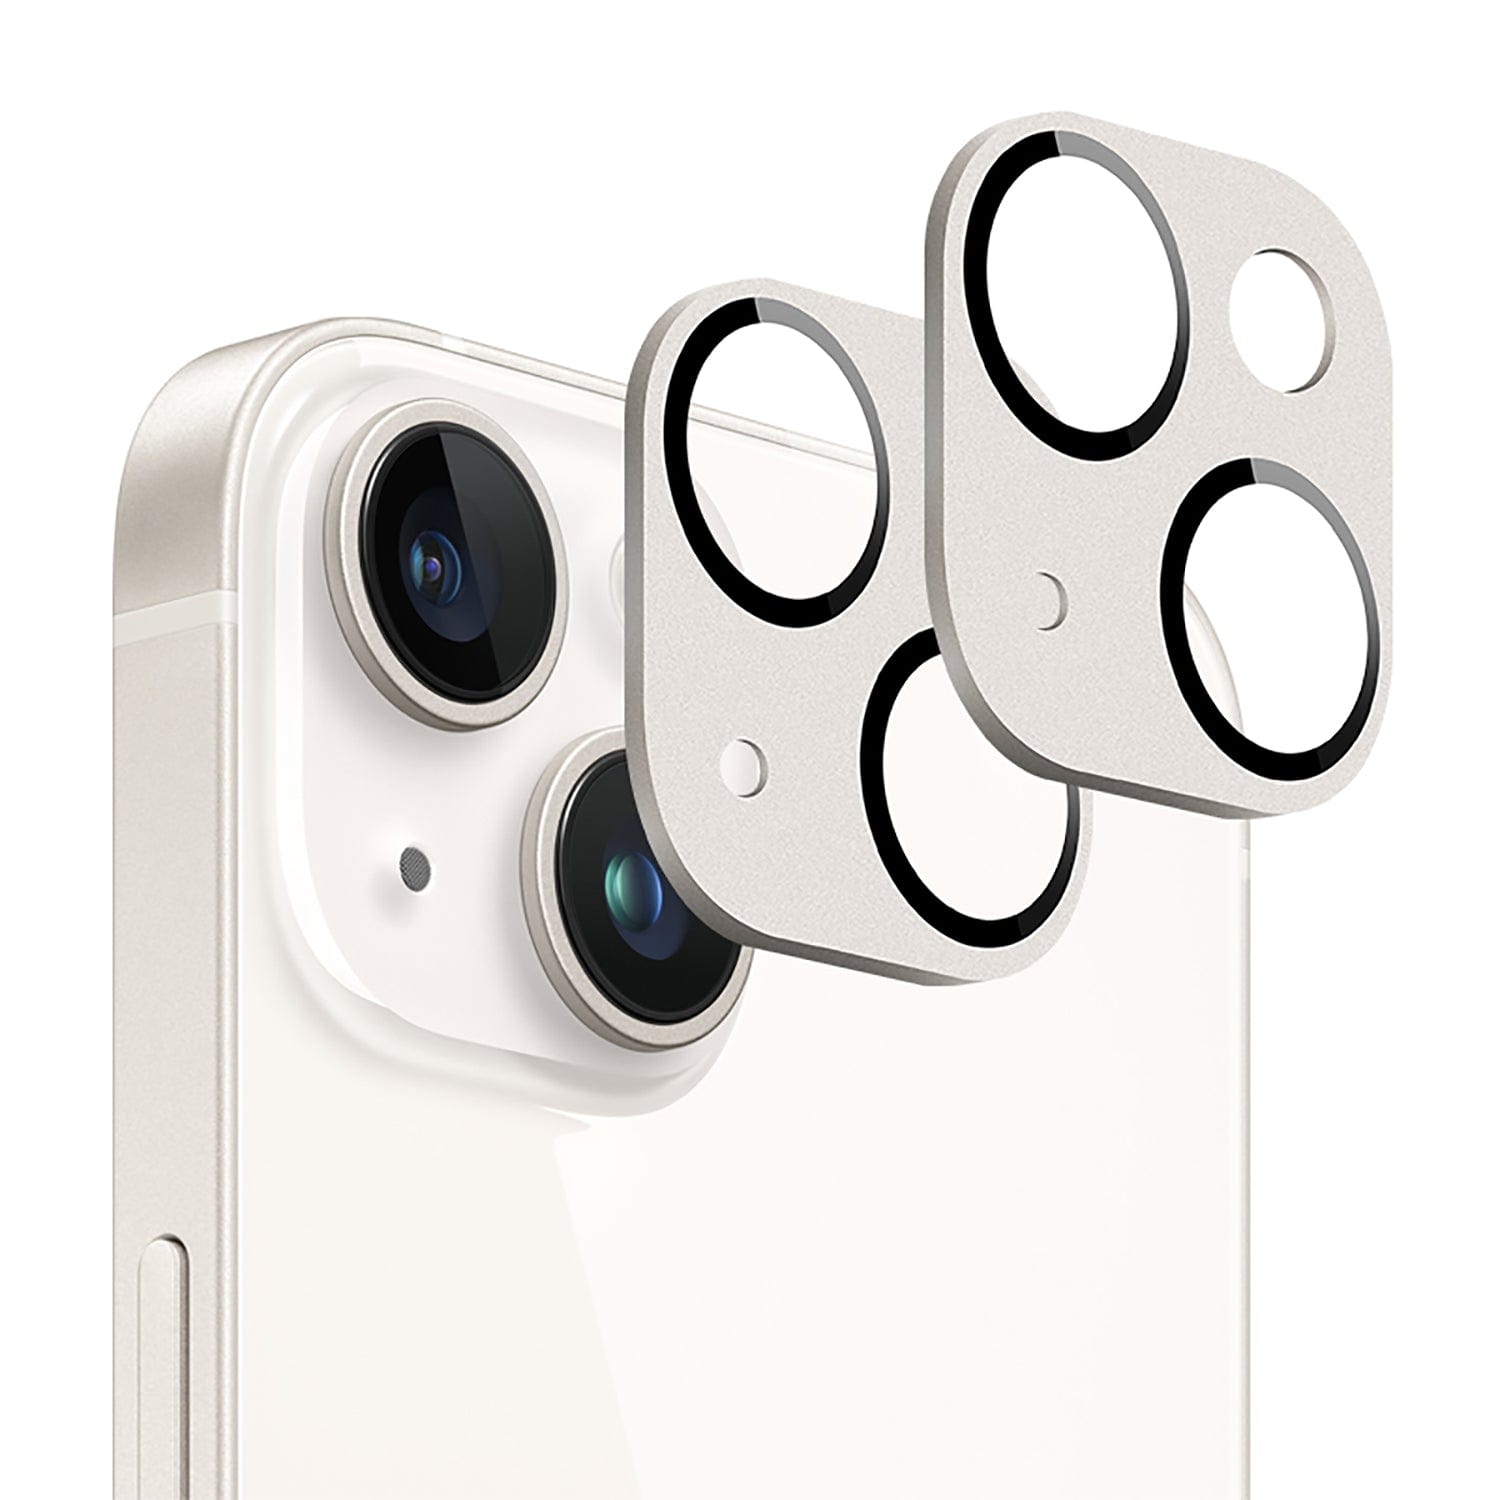 Everything New About The iPhone 14 Camera (& How To Protect It)